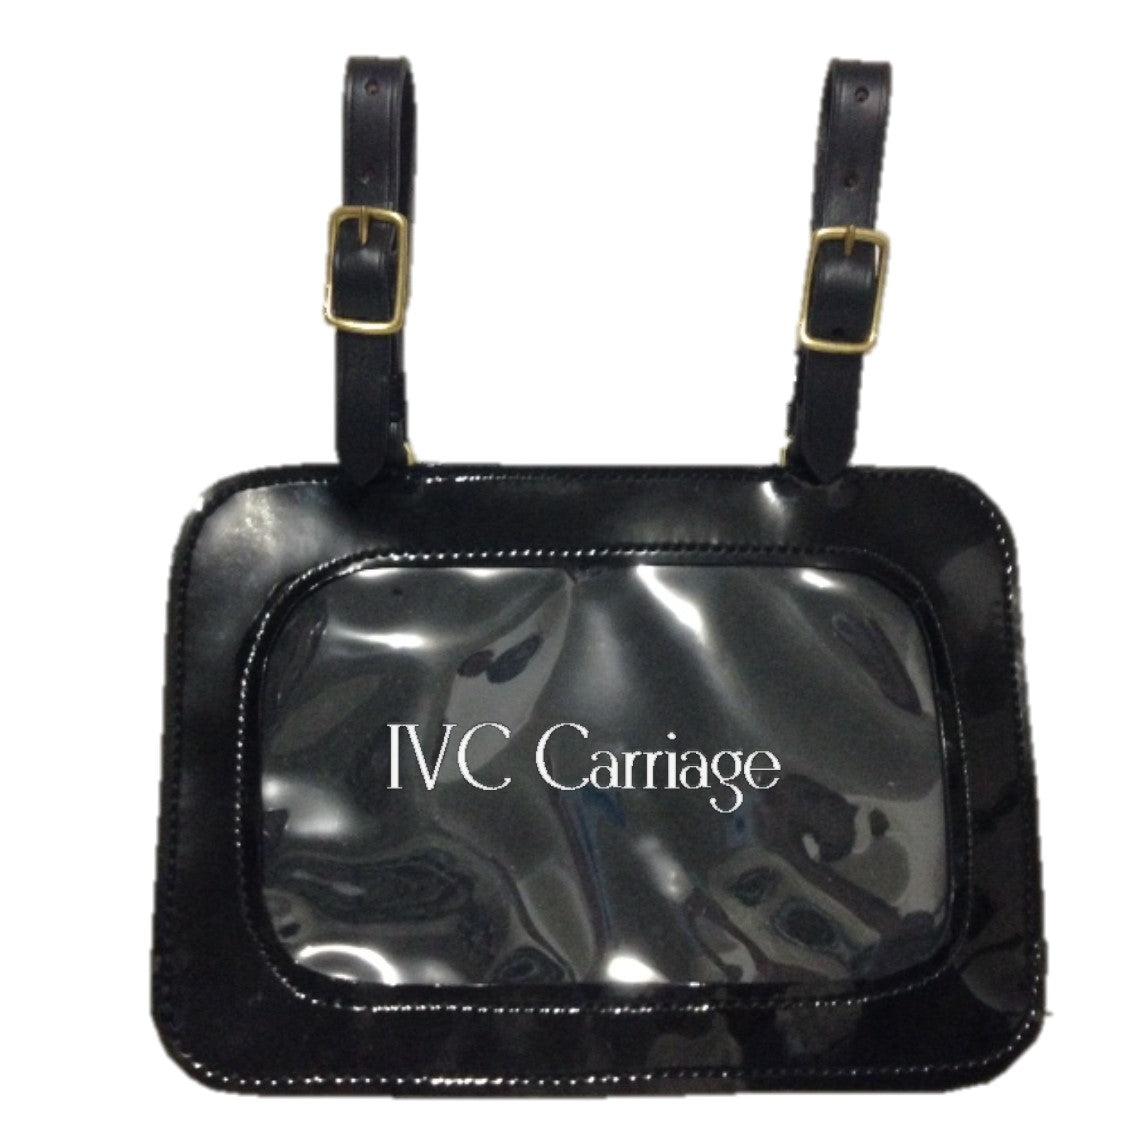 Patent Leather Carriage Show Number Holder